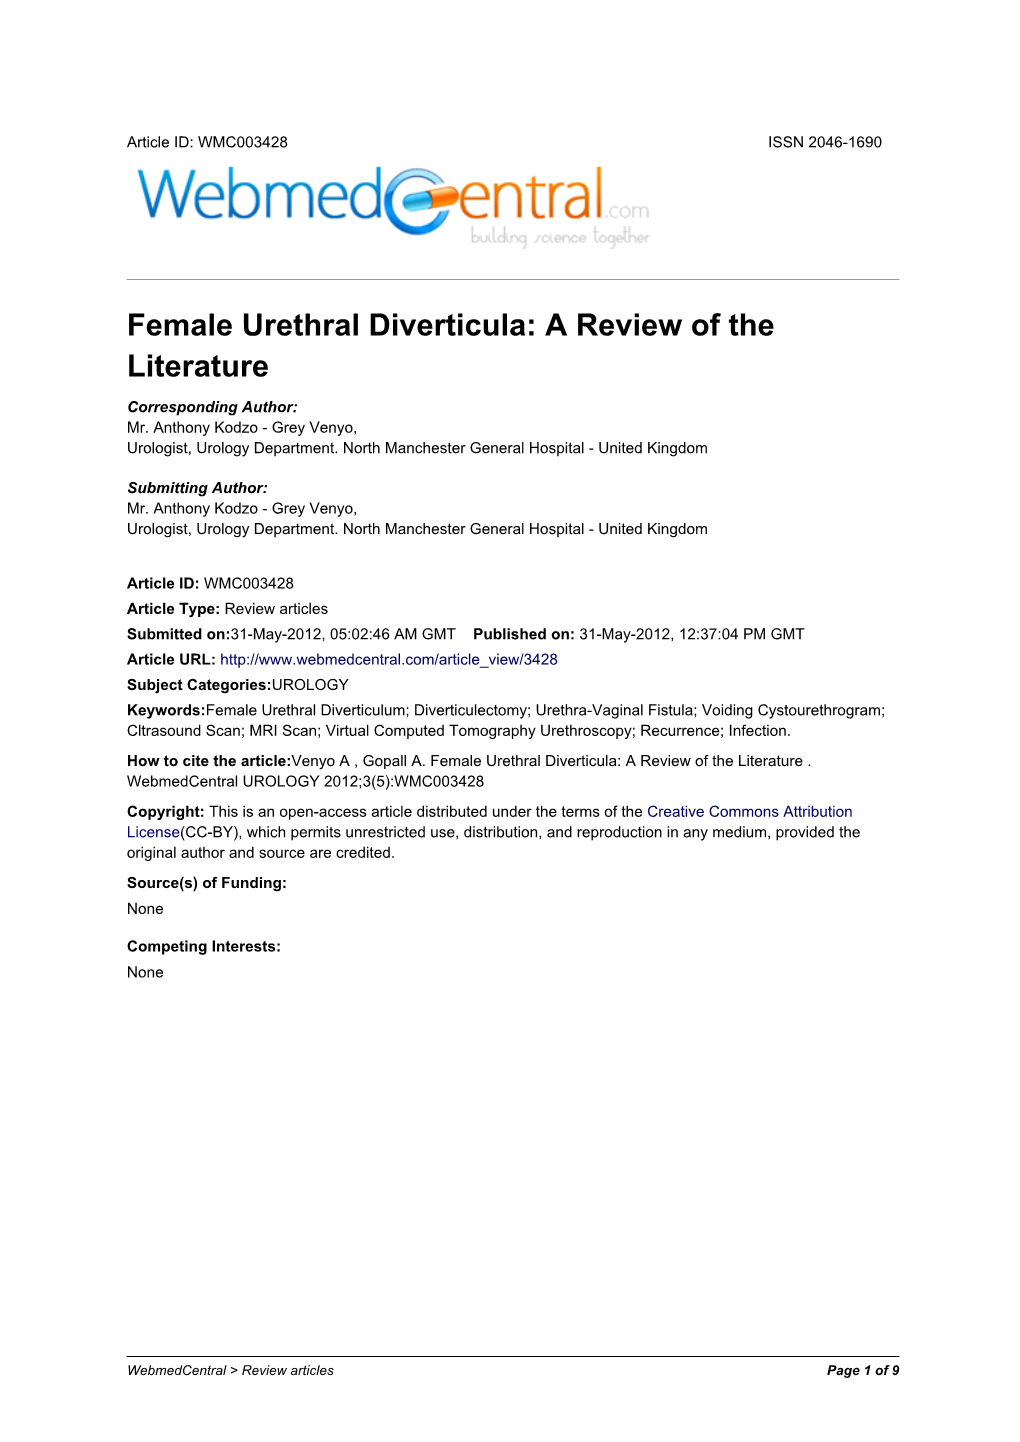 Female Urethral Diverticula: a Review of the Literature